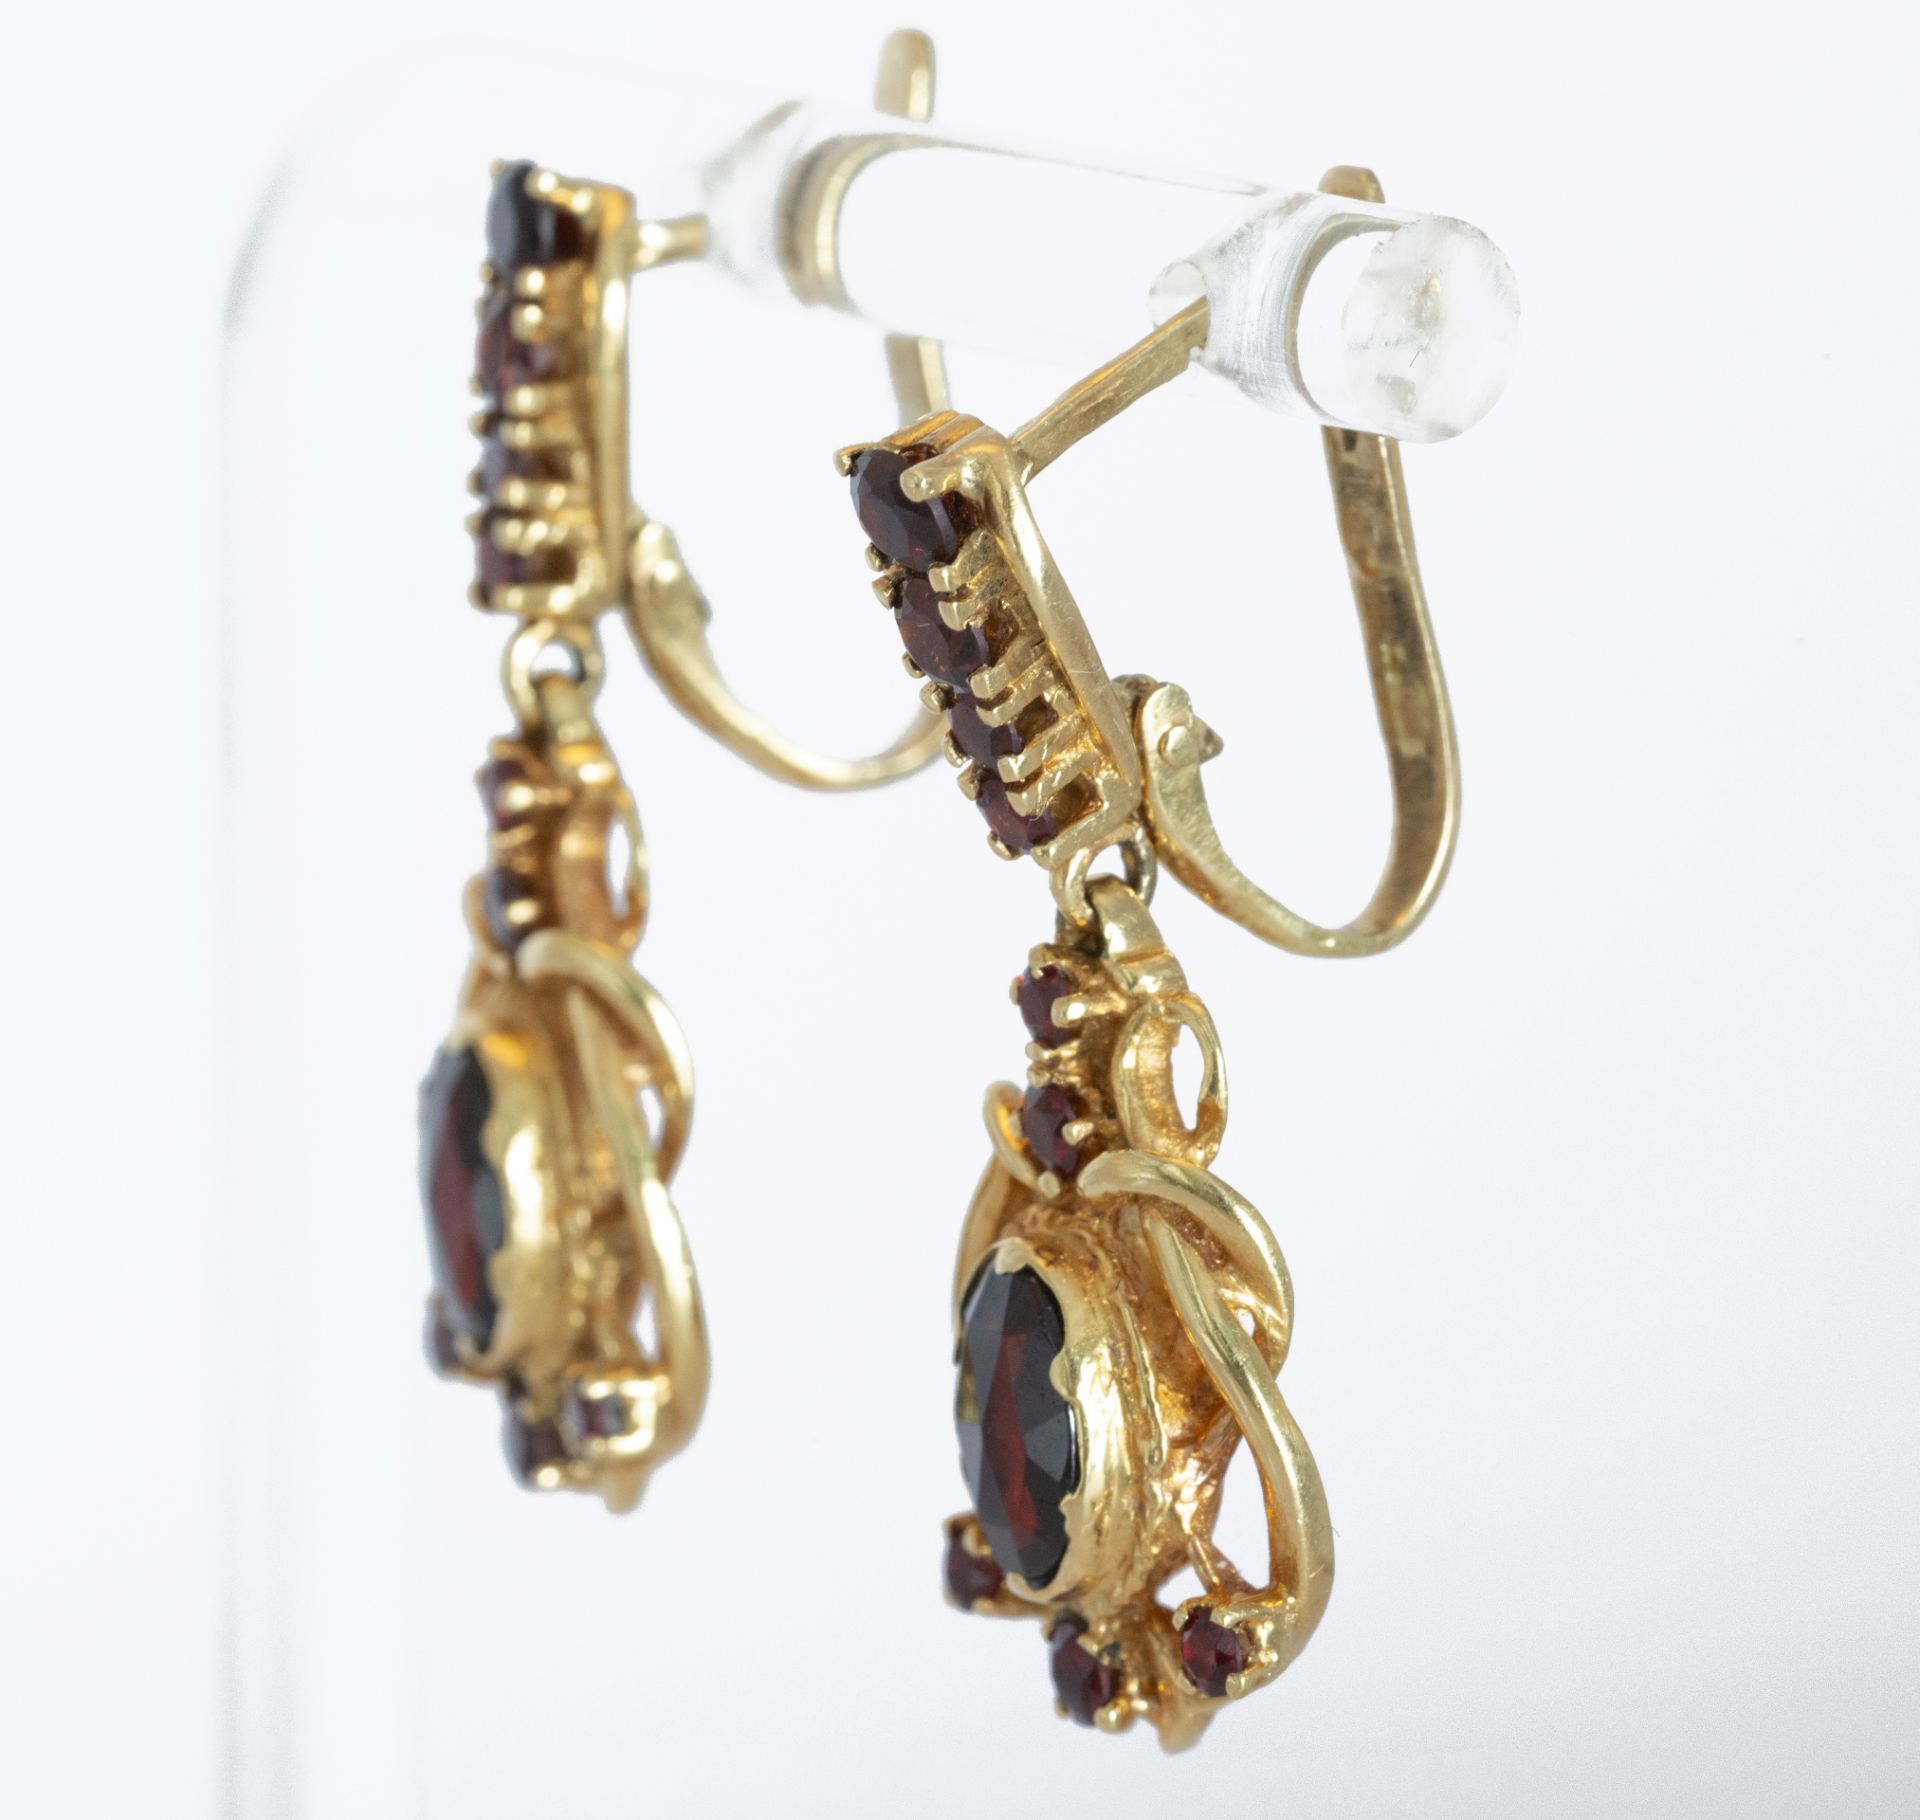 18kt gold earrings with garnets - Image 2 of 4